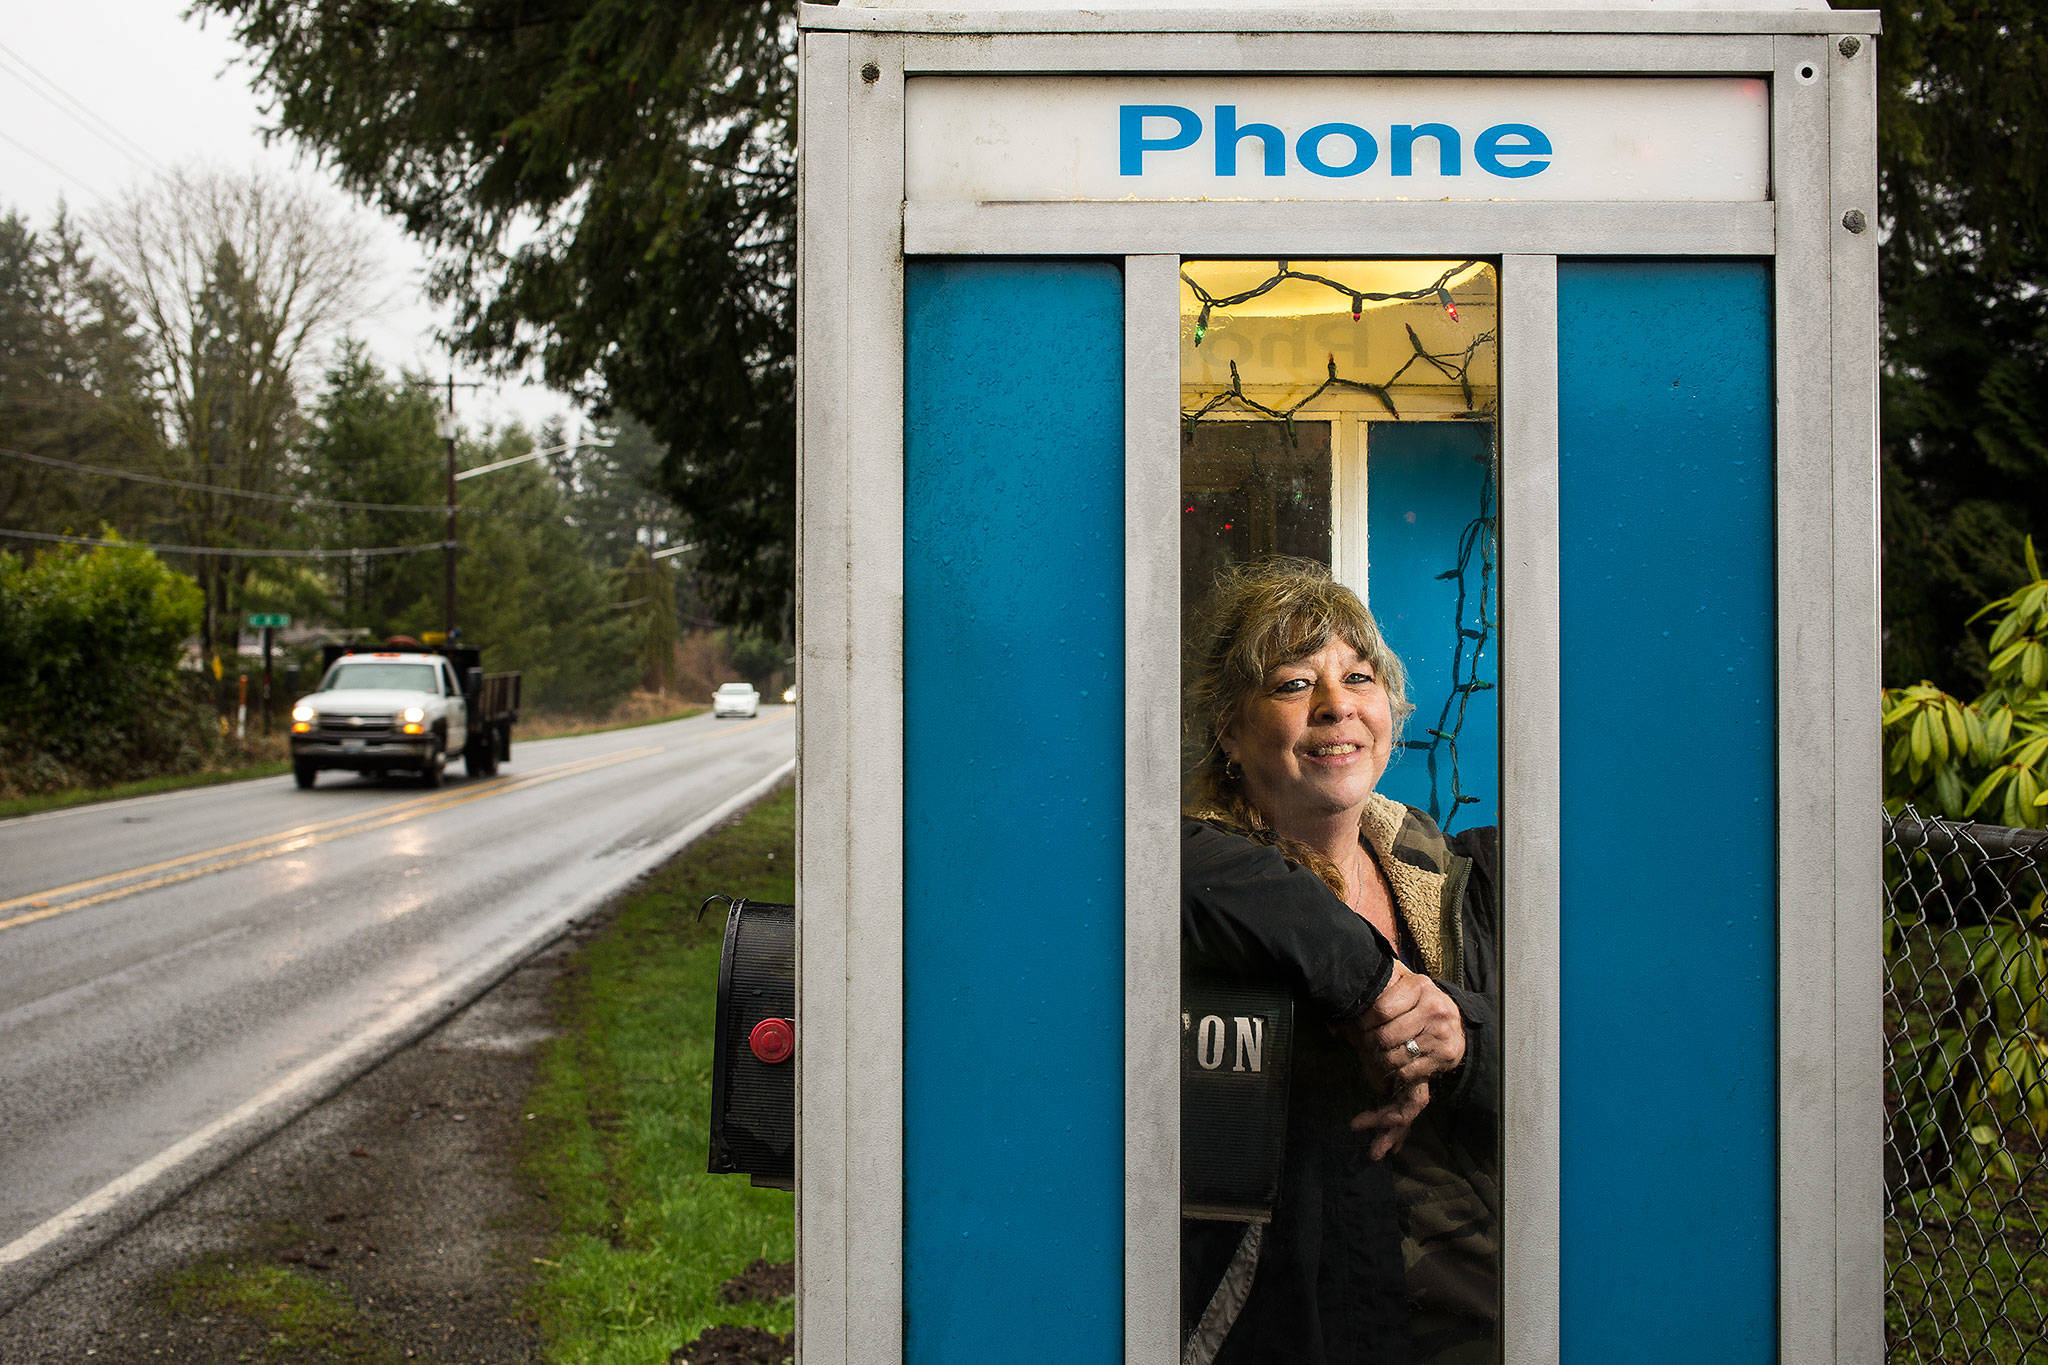 Clearview phone booth-turned-mailbox packs some wham-bam-pow ...